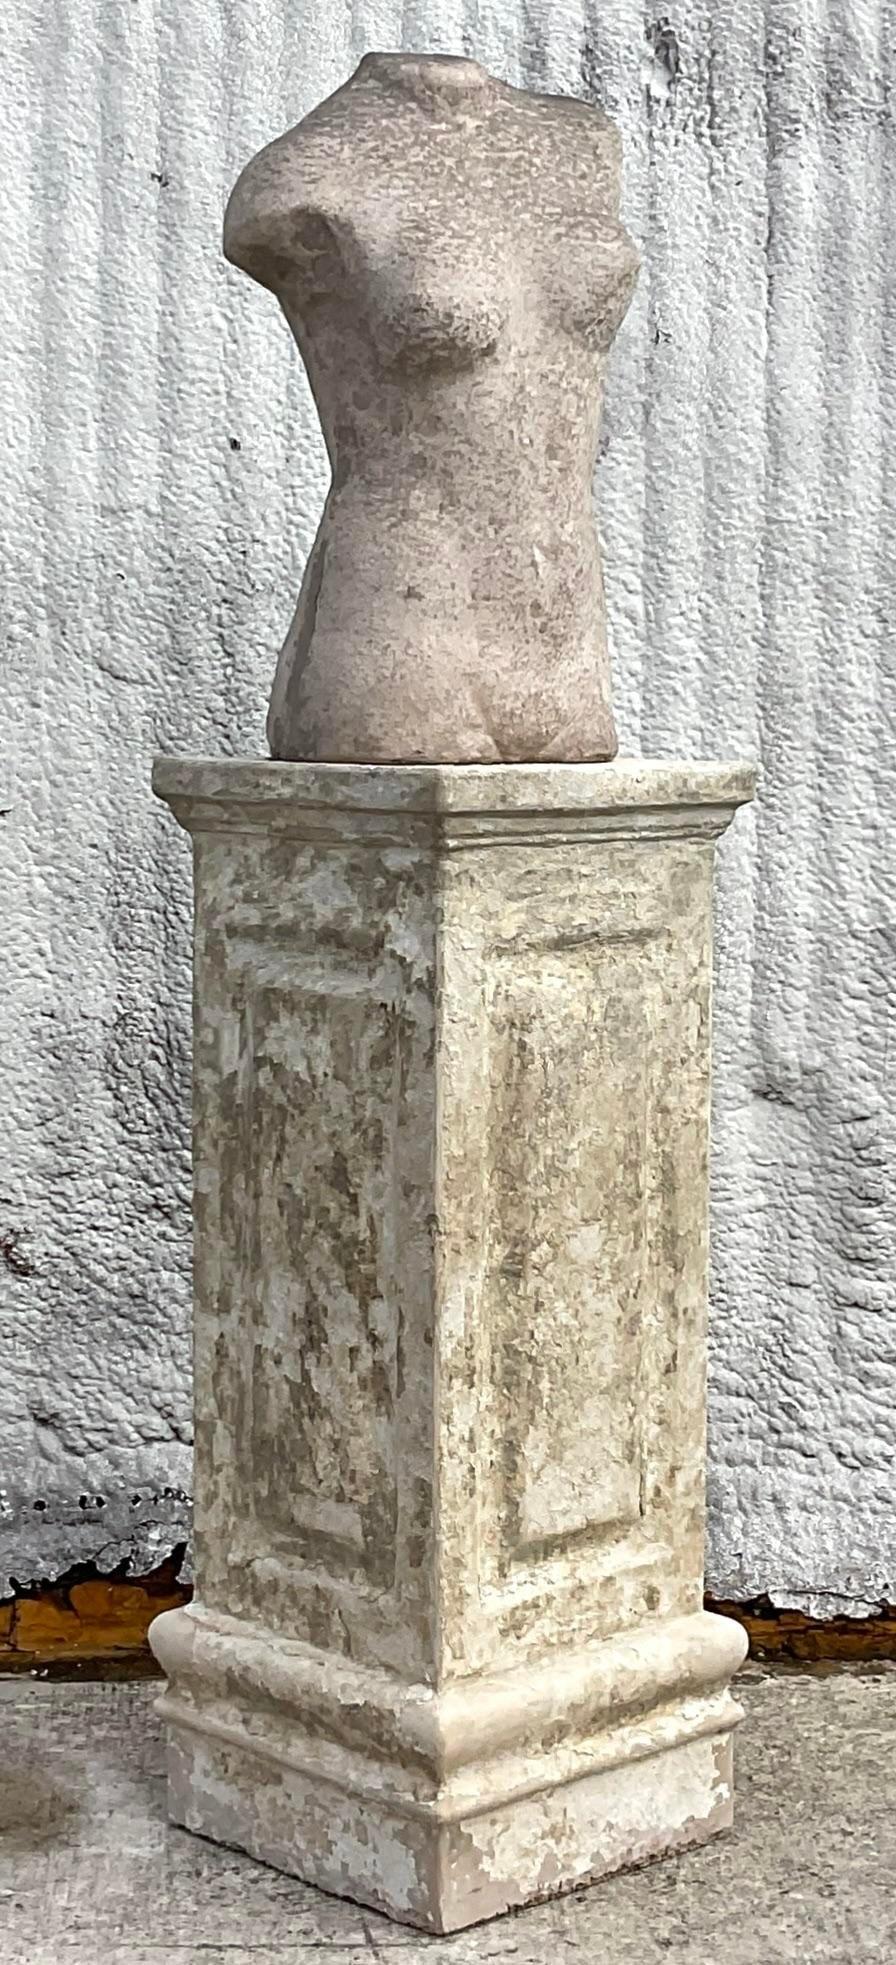 A fabulous vintage Boho female bust on a pedestal. A chic rough cut stone pedestal with a smooth cut female torso. Perfect indoors or outside. Acquired from a Palm Beach estate.

Bust dimensions 13x9x26